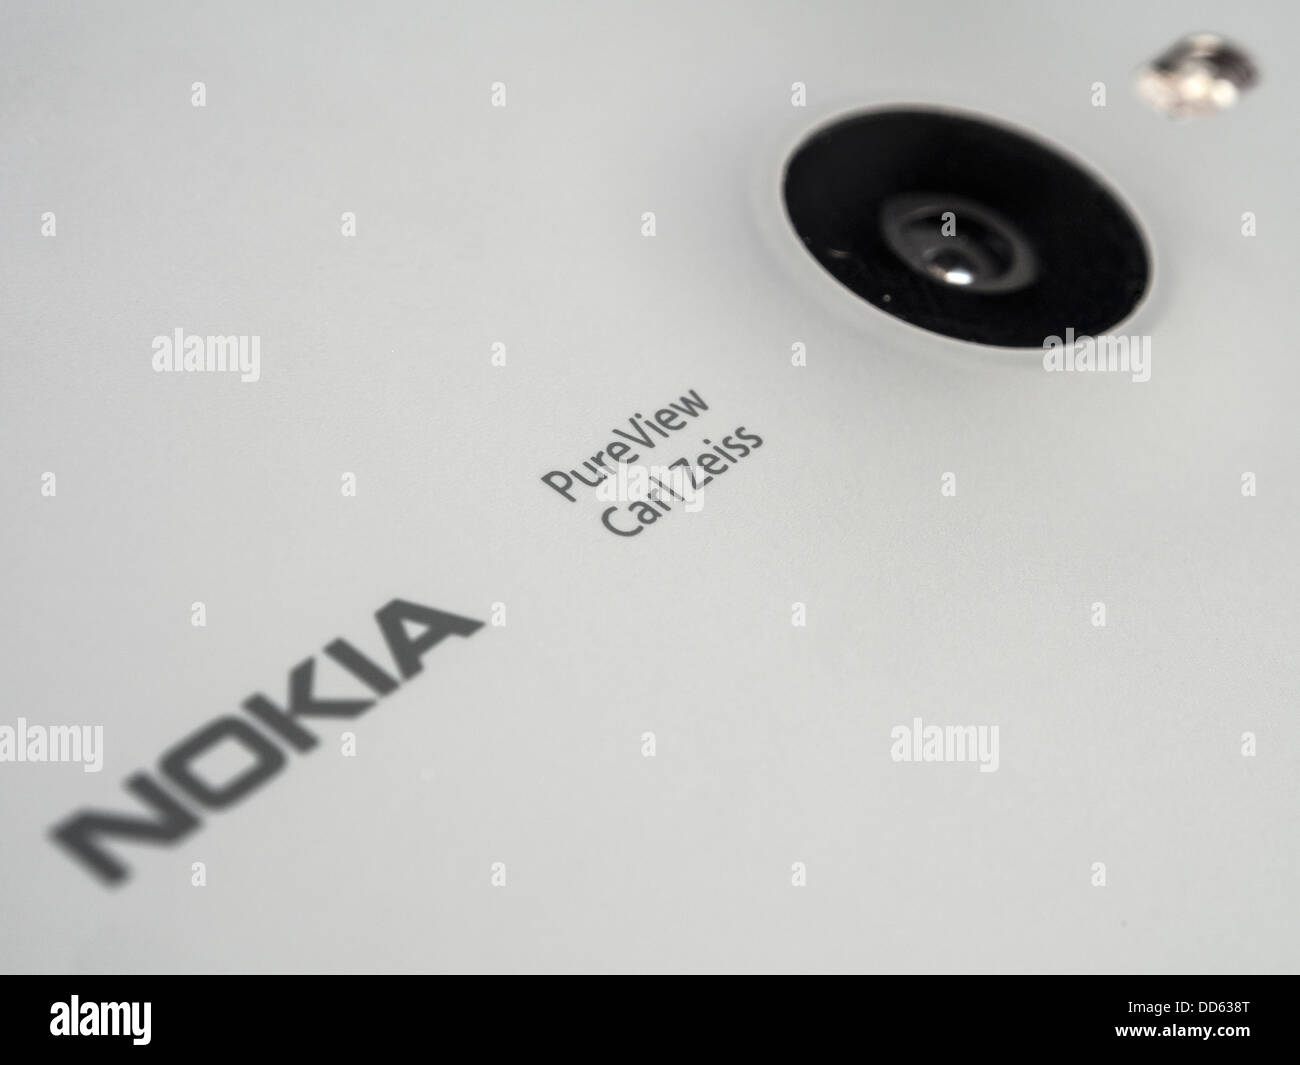 Nokia 925 PureView Carl Zeiss lens Stock Photo